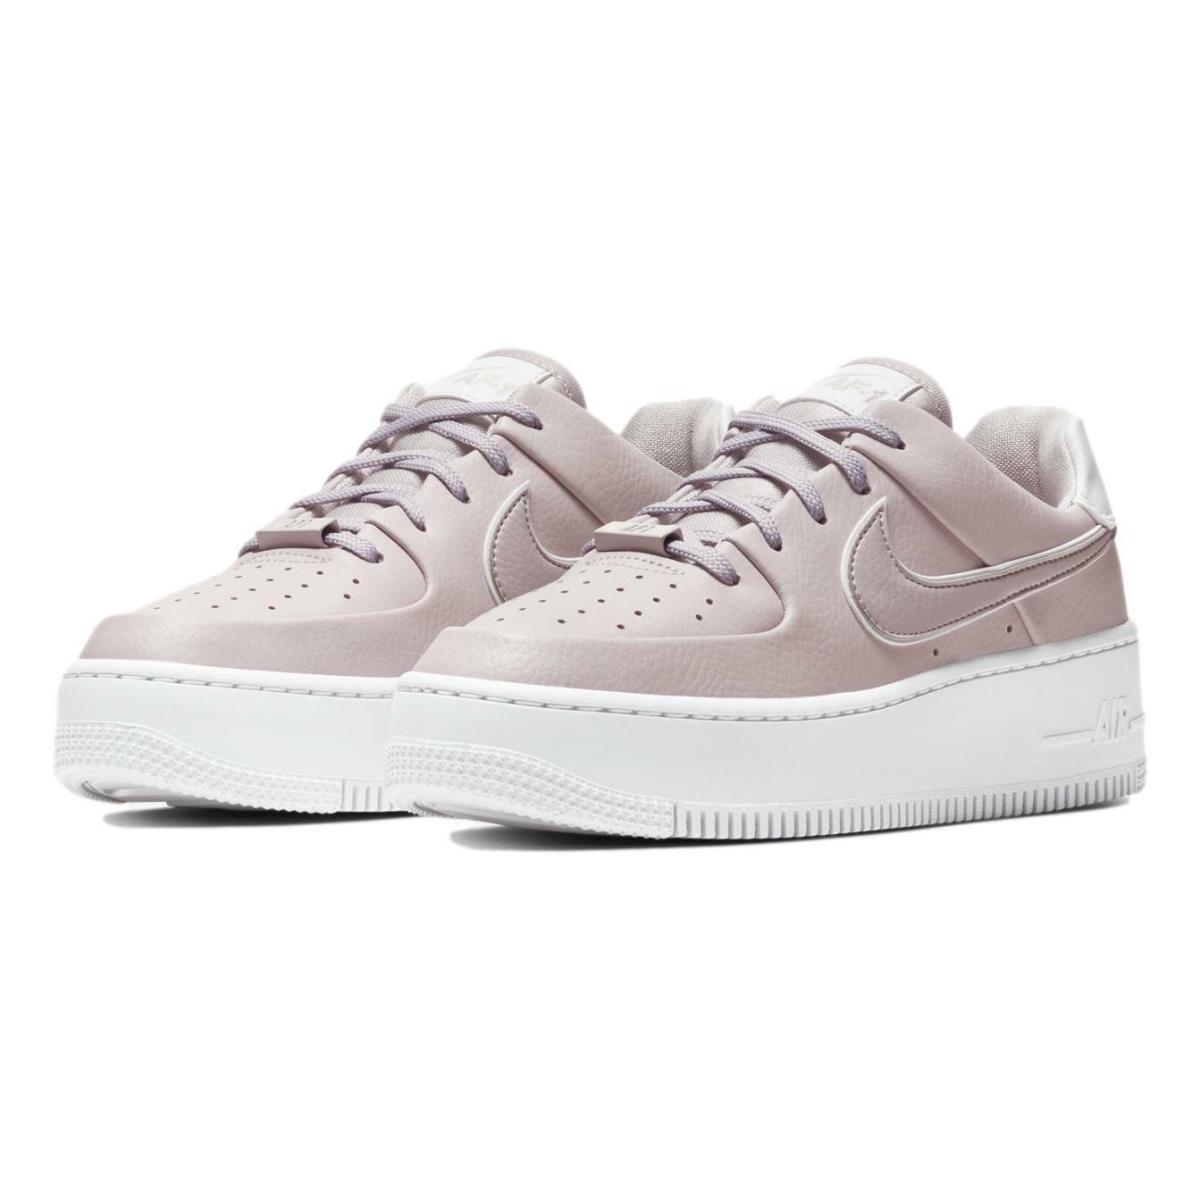 Nike Air Force 1 Sage Low Women`s Shoes Sneakers Platinum Violet/white CJ1642 - Platinum Violet/White